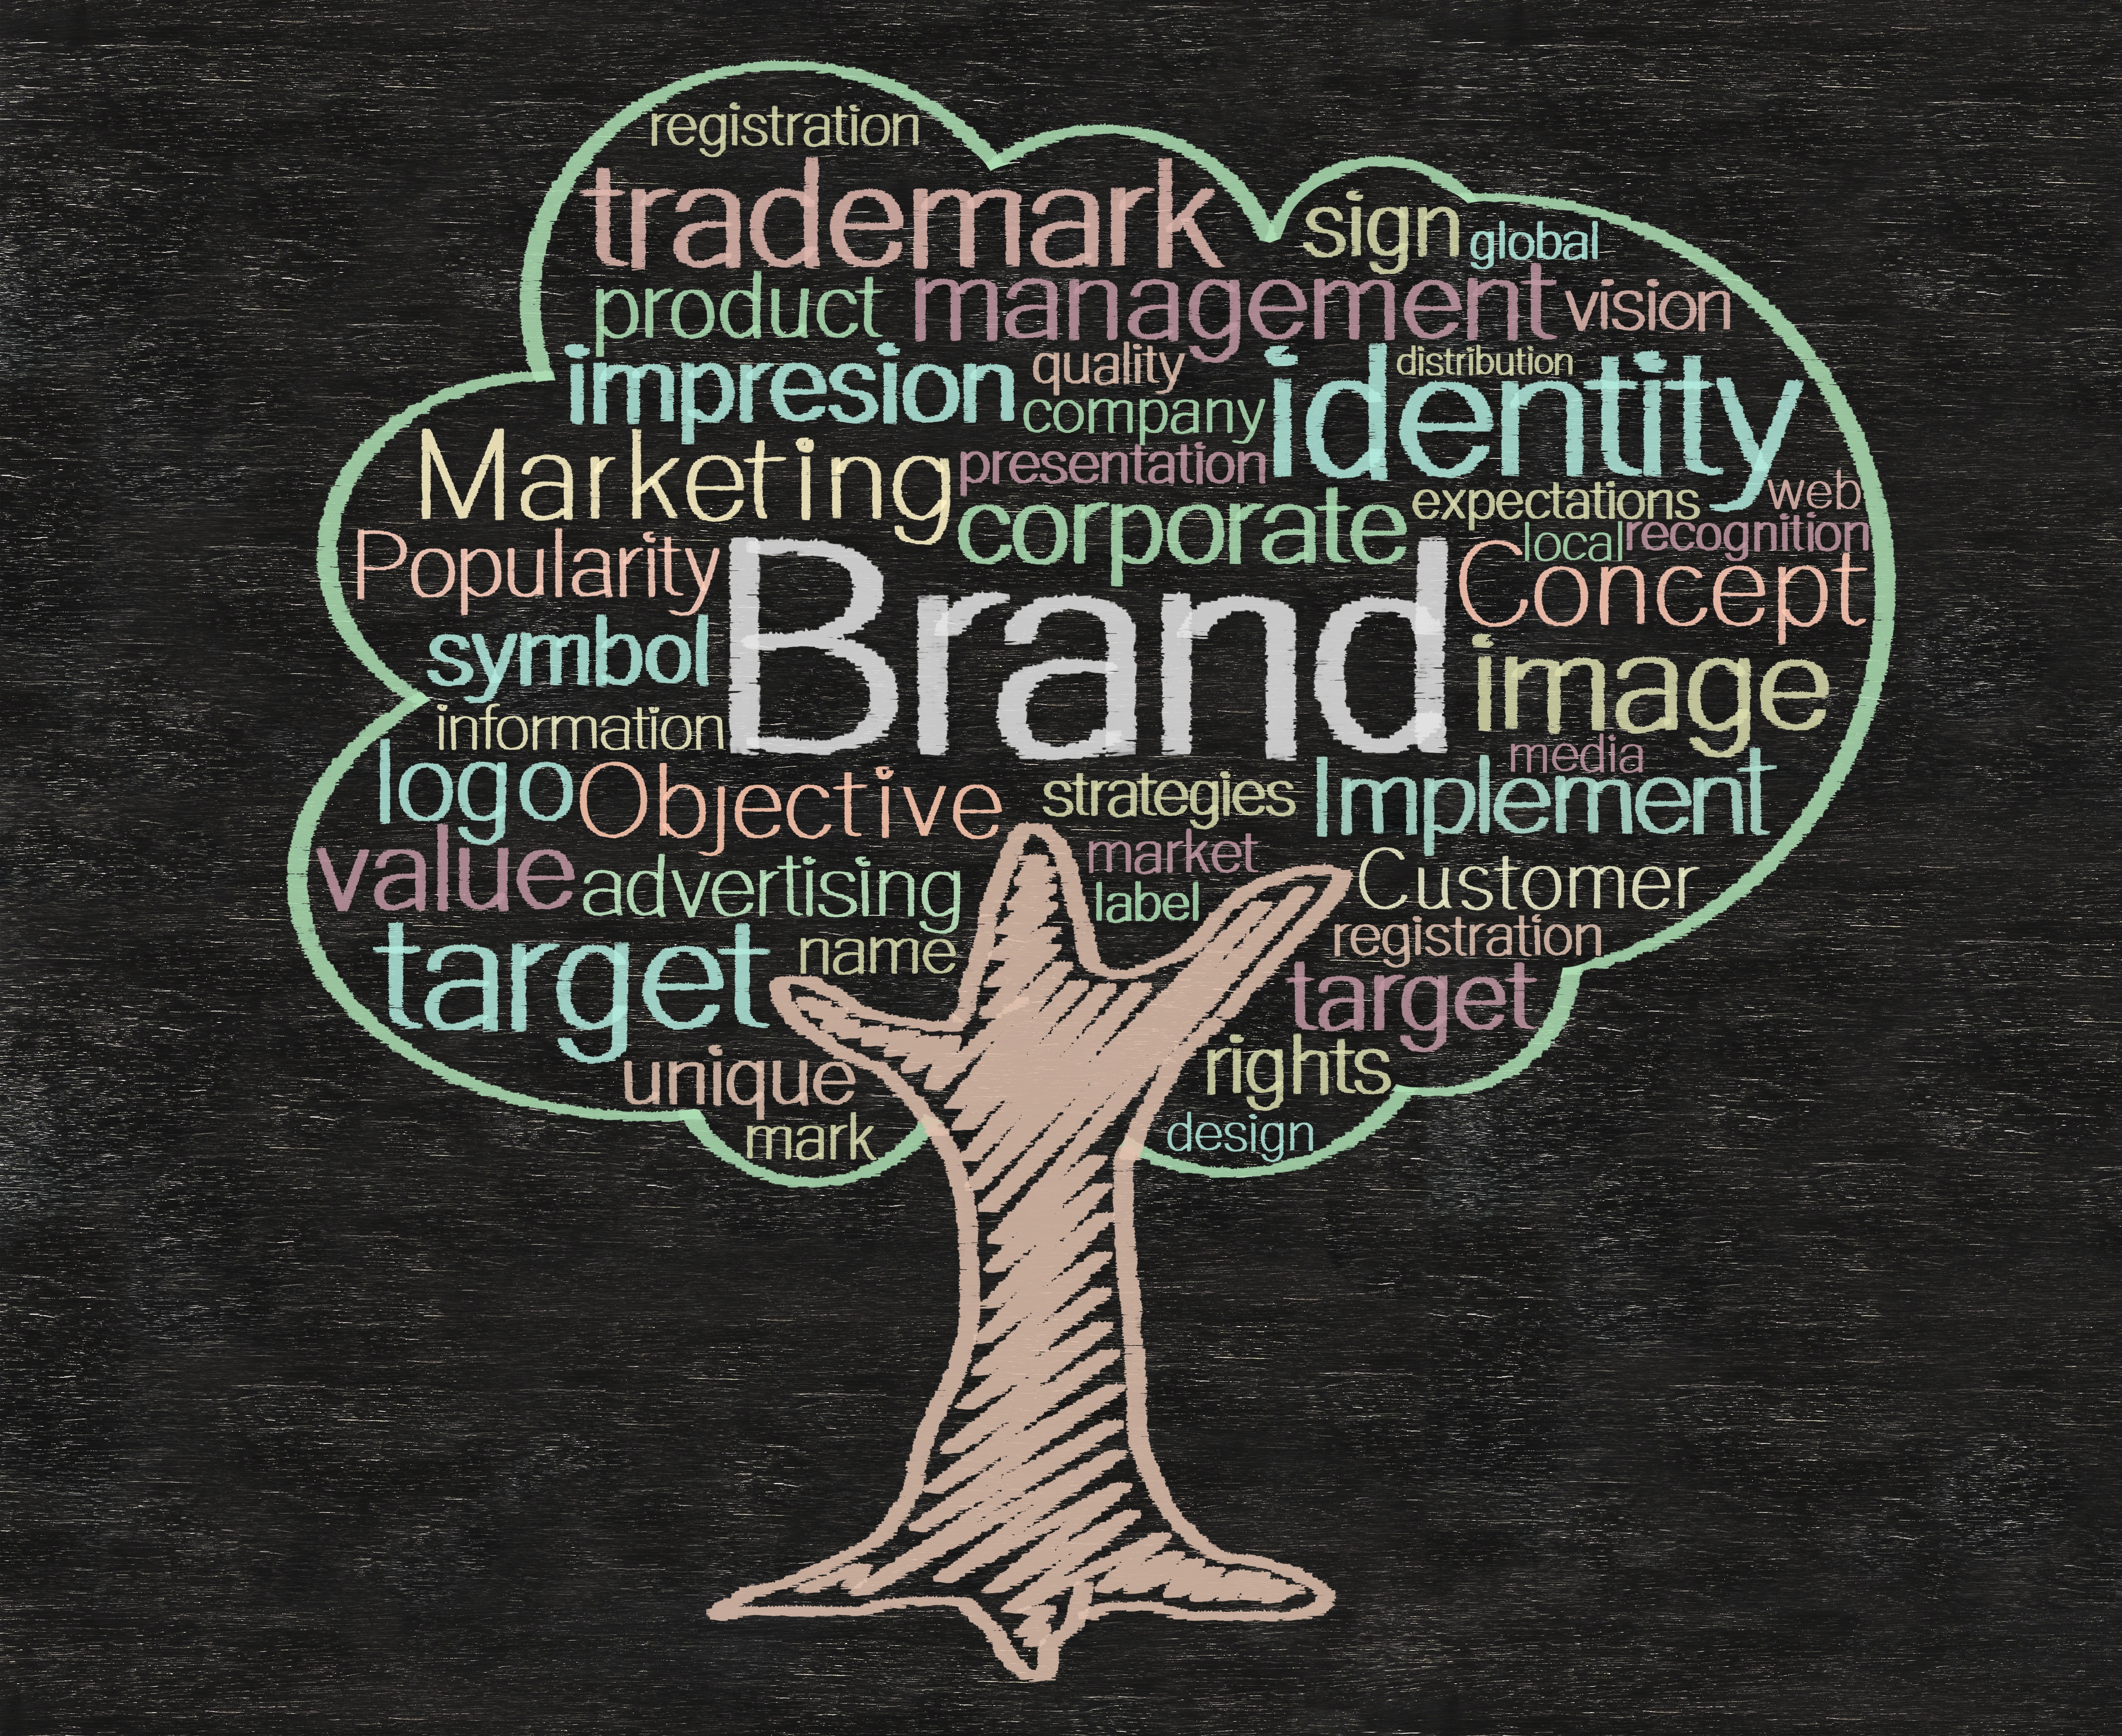 A tree drawn against a chalkboard out of different colors like green, white, yellow, red and brown. Various marketing words make up its leafy top like brand, logo, target, concept, and trademark.